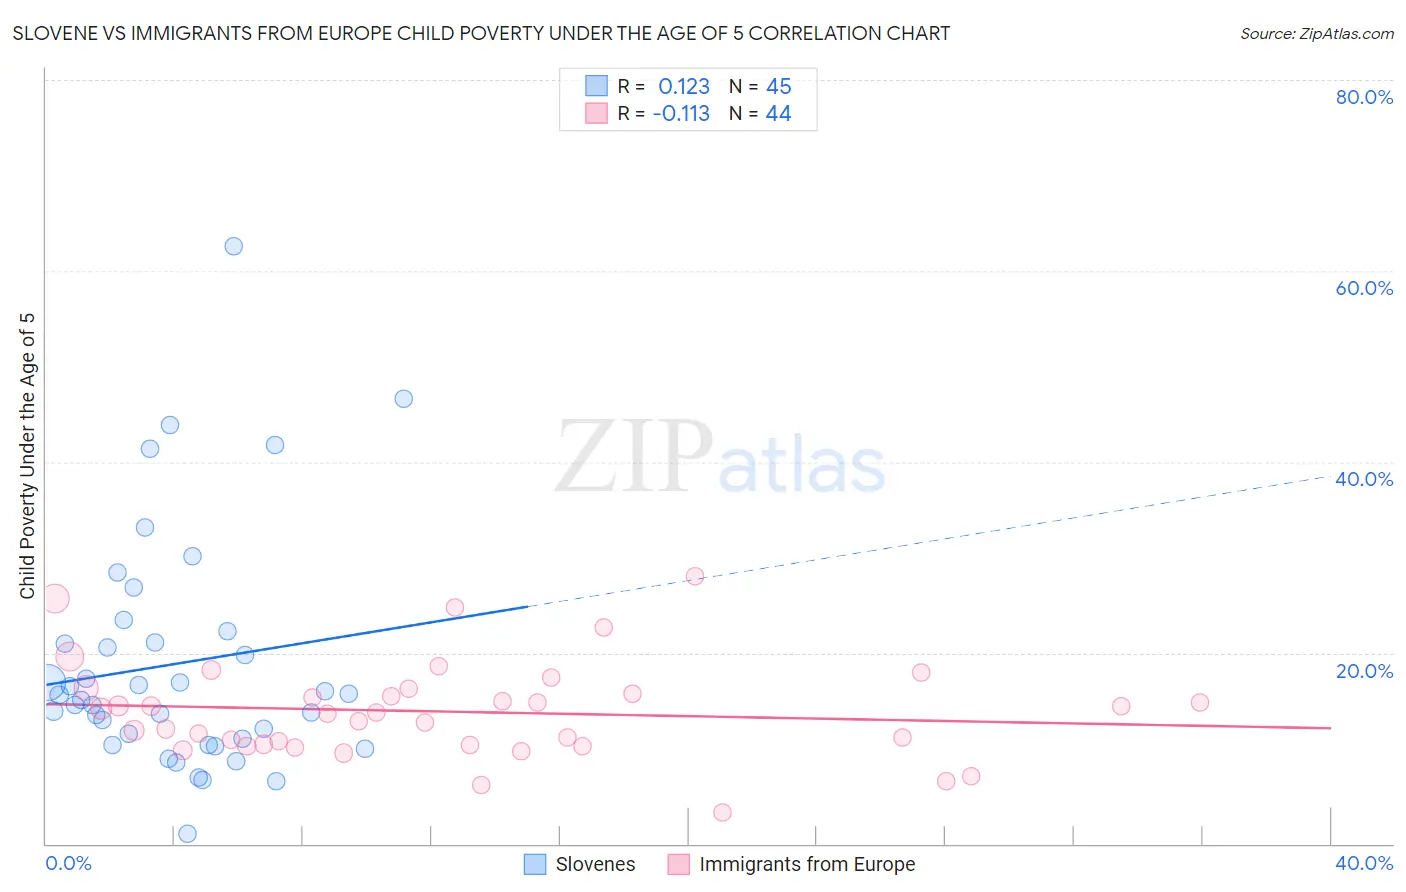 Slovene vs Immigrants from Europe Child Poverty Under the Age of 5